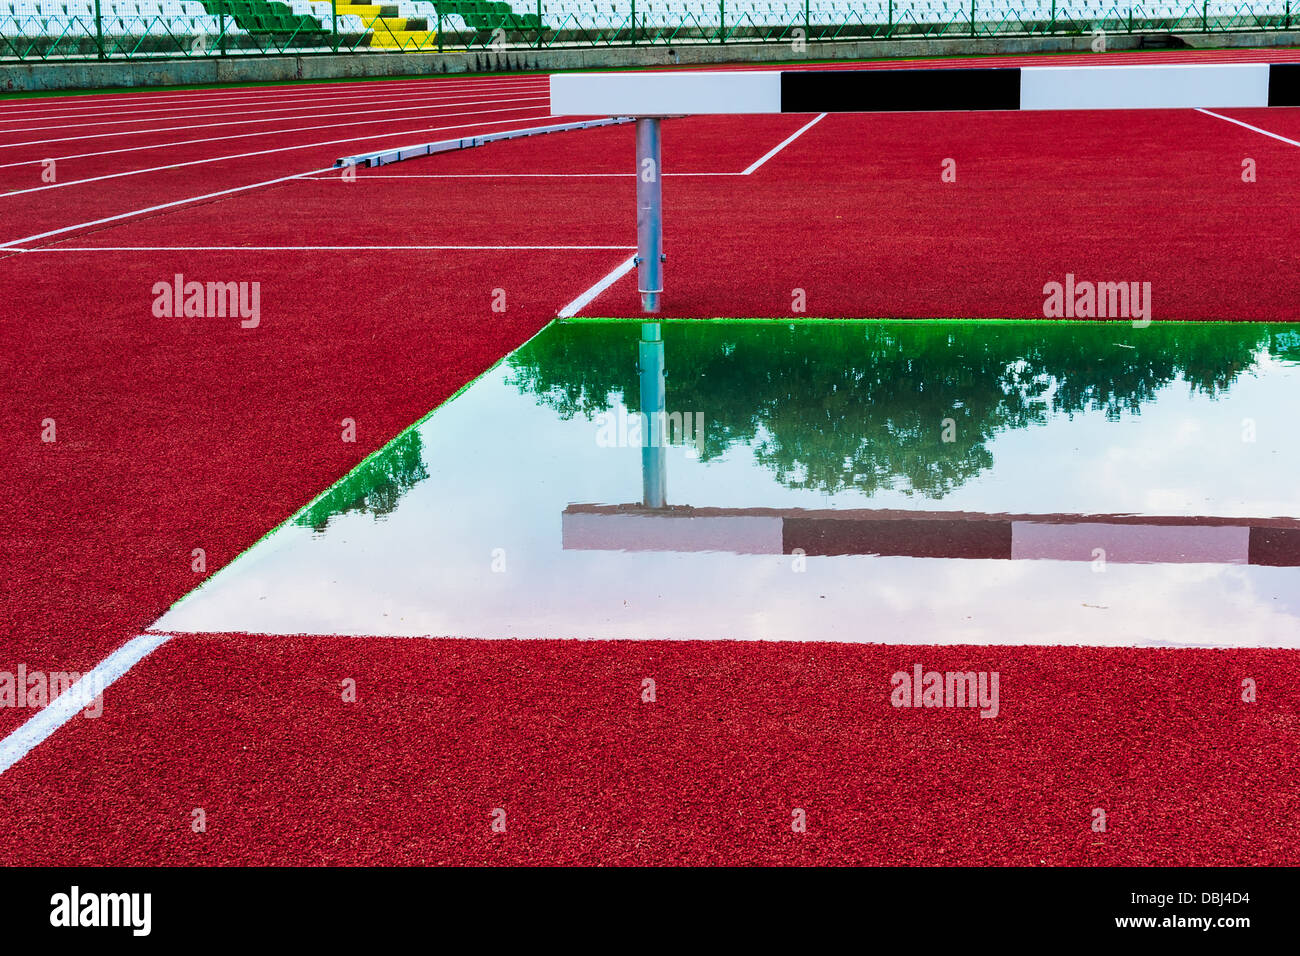 Athletic track with hurdle to jump over water Stock Photo